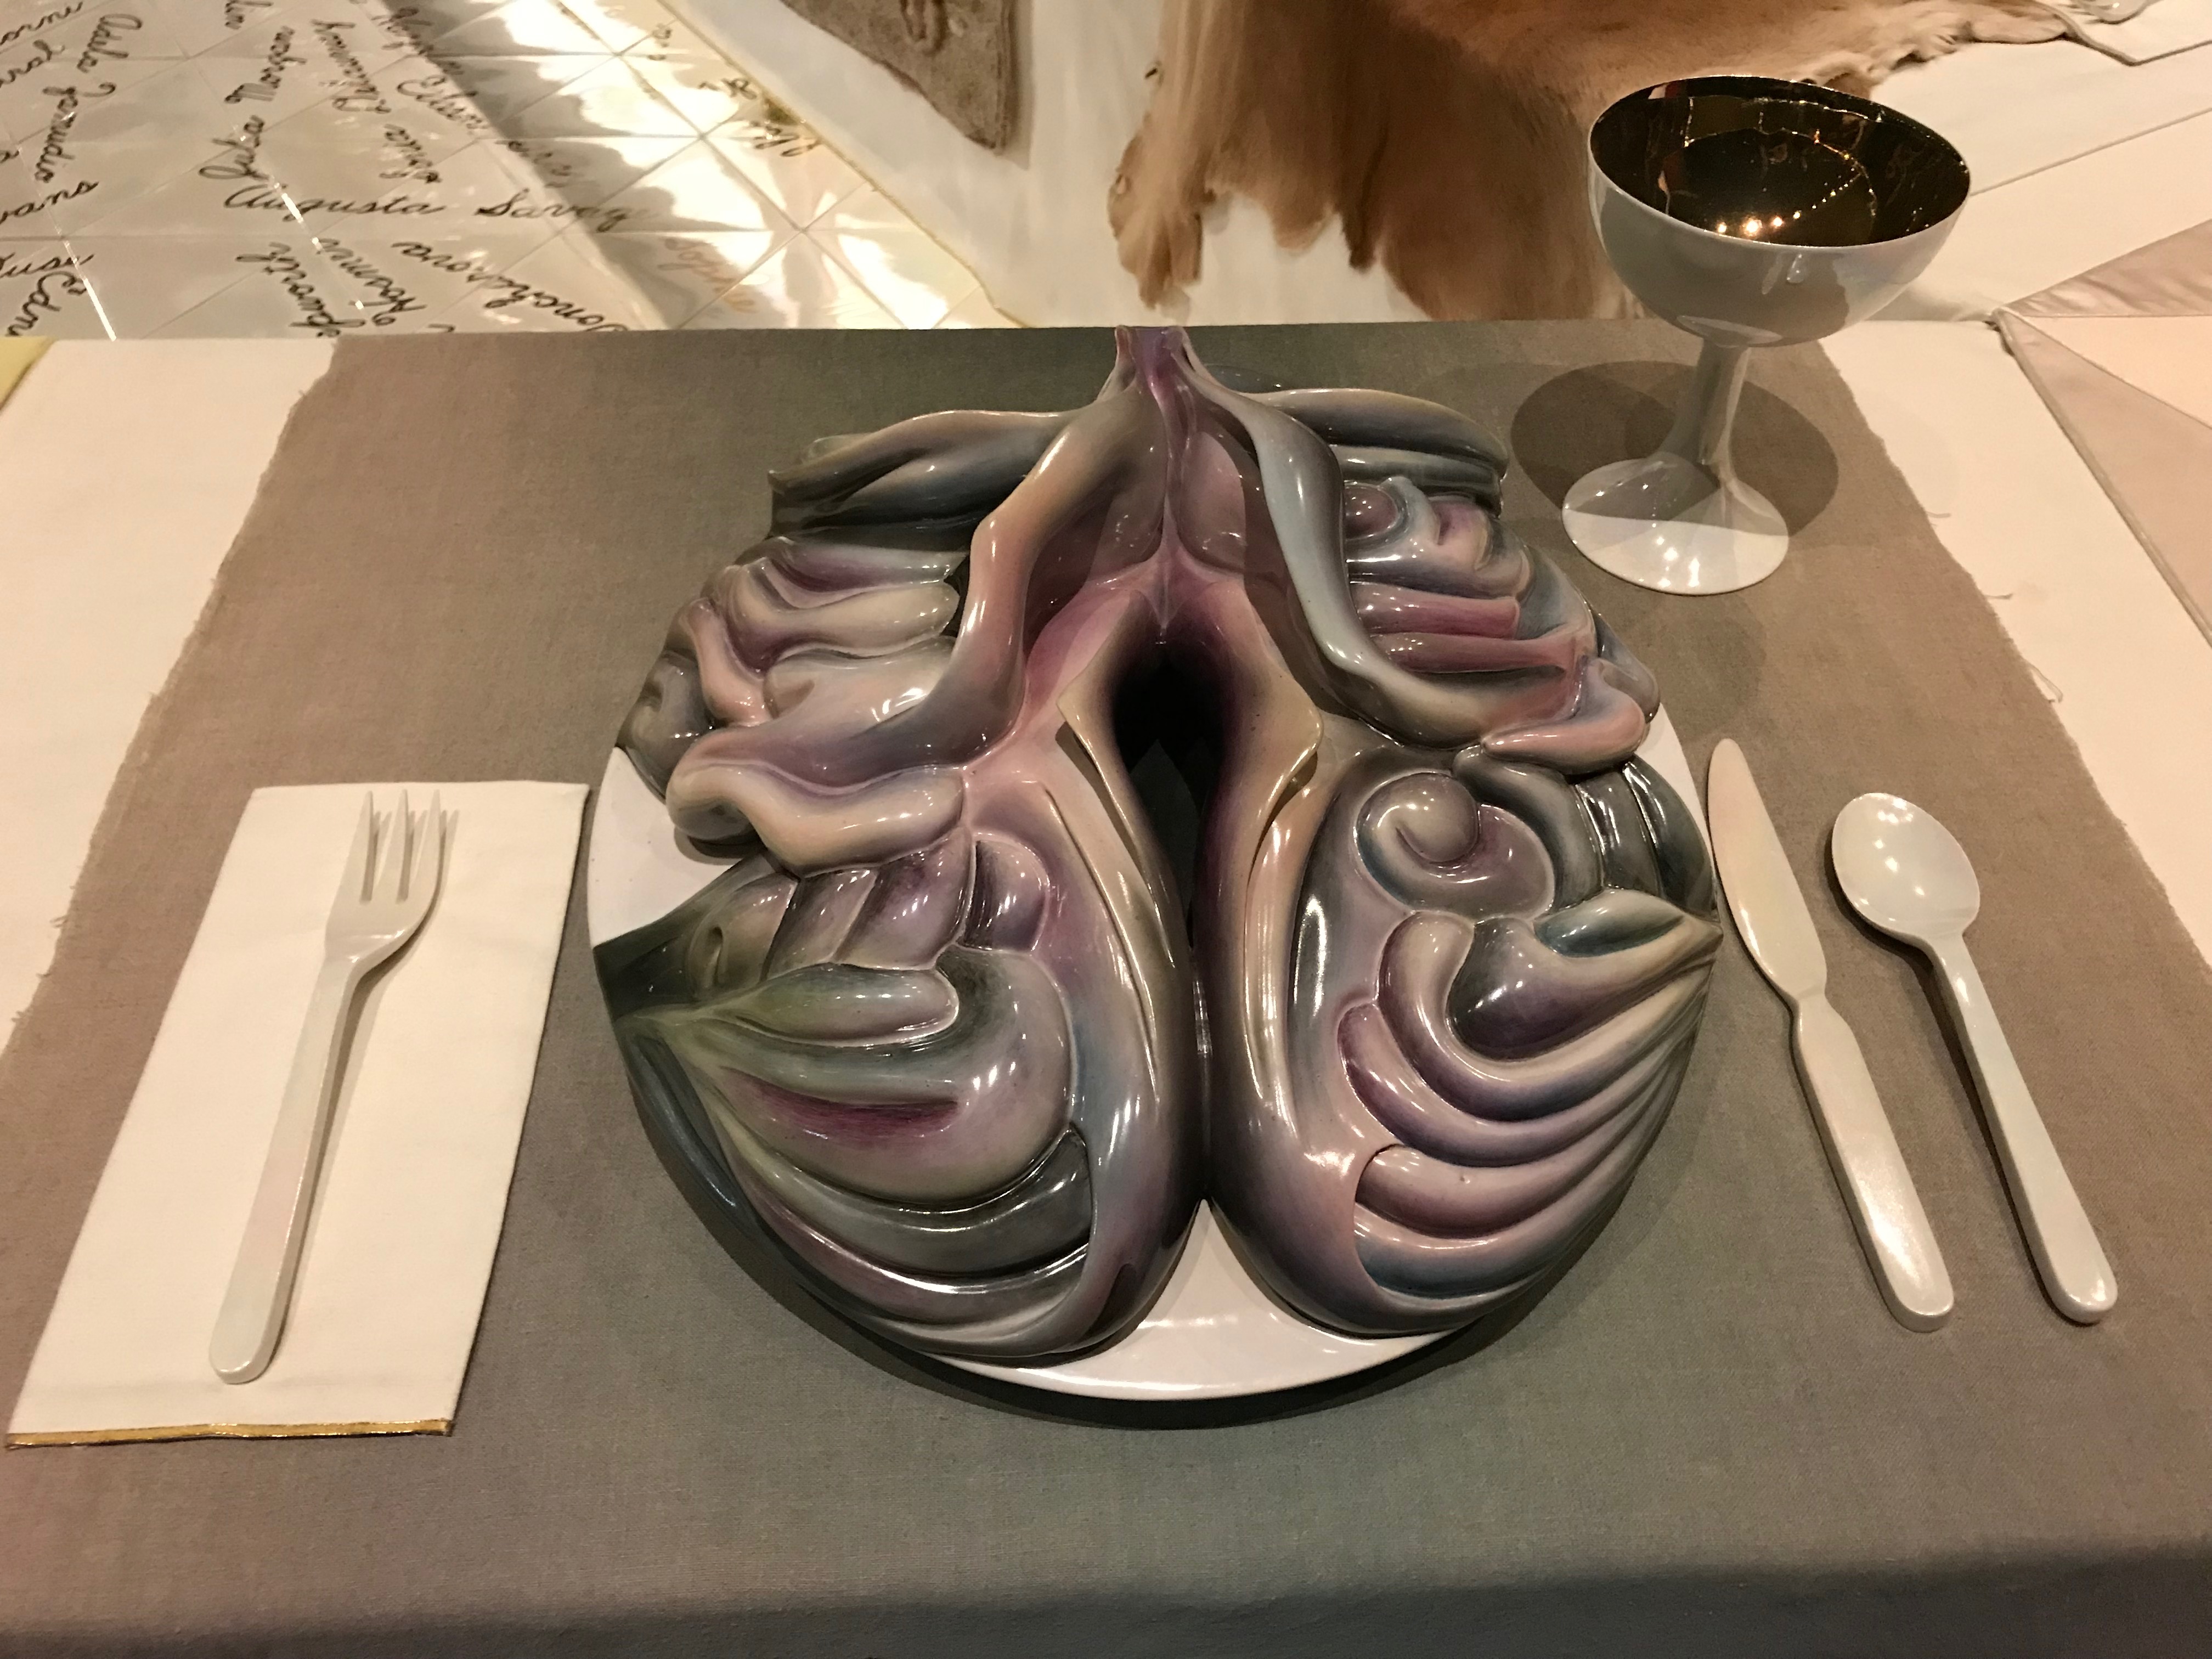 A place setting at The Dinner Party Exhibit at the Elizabeth A. Sackler Center for Feminist Art at the Brooklyn Museum in New York City. (DCNF/Ethan Barton)